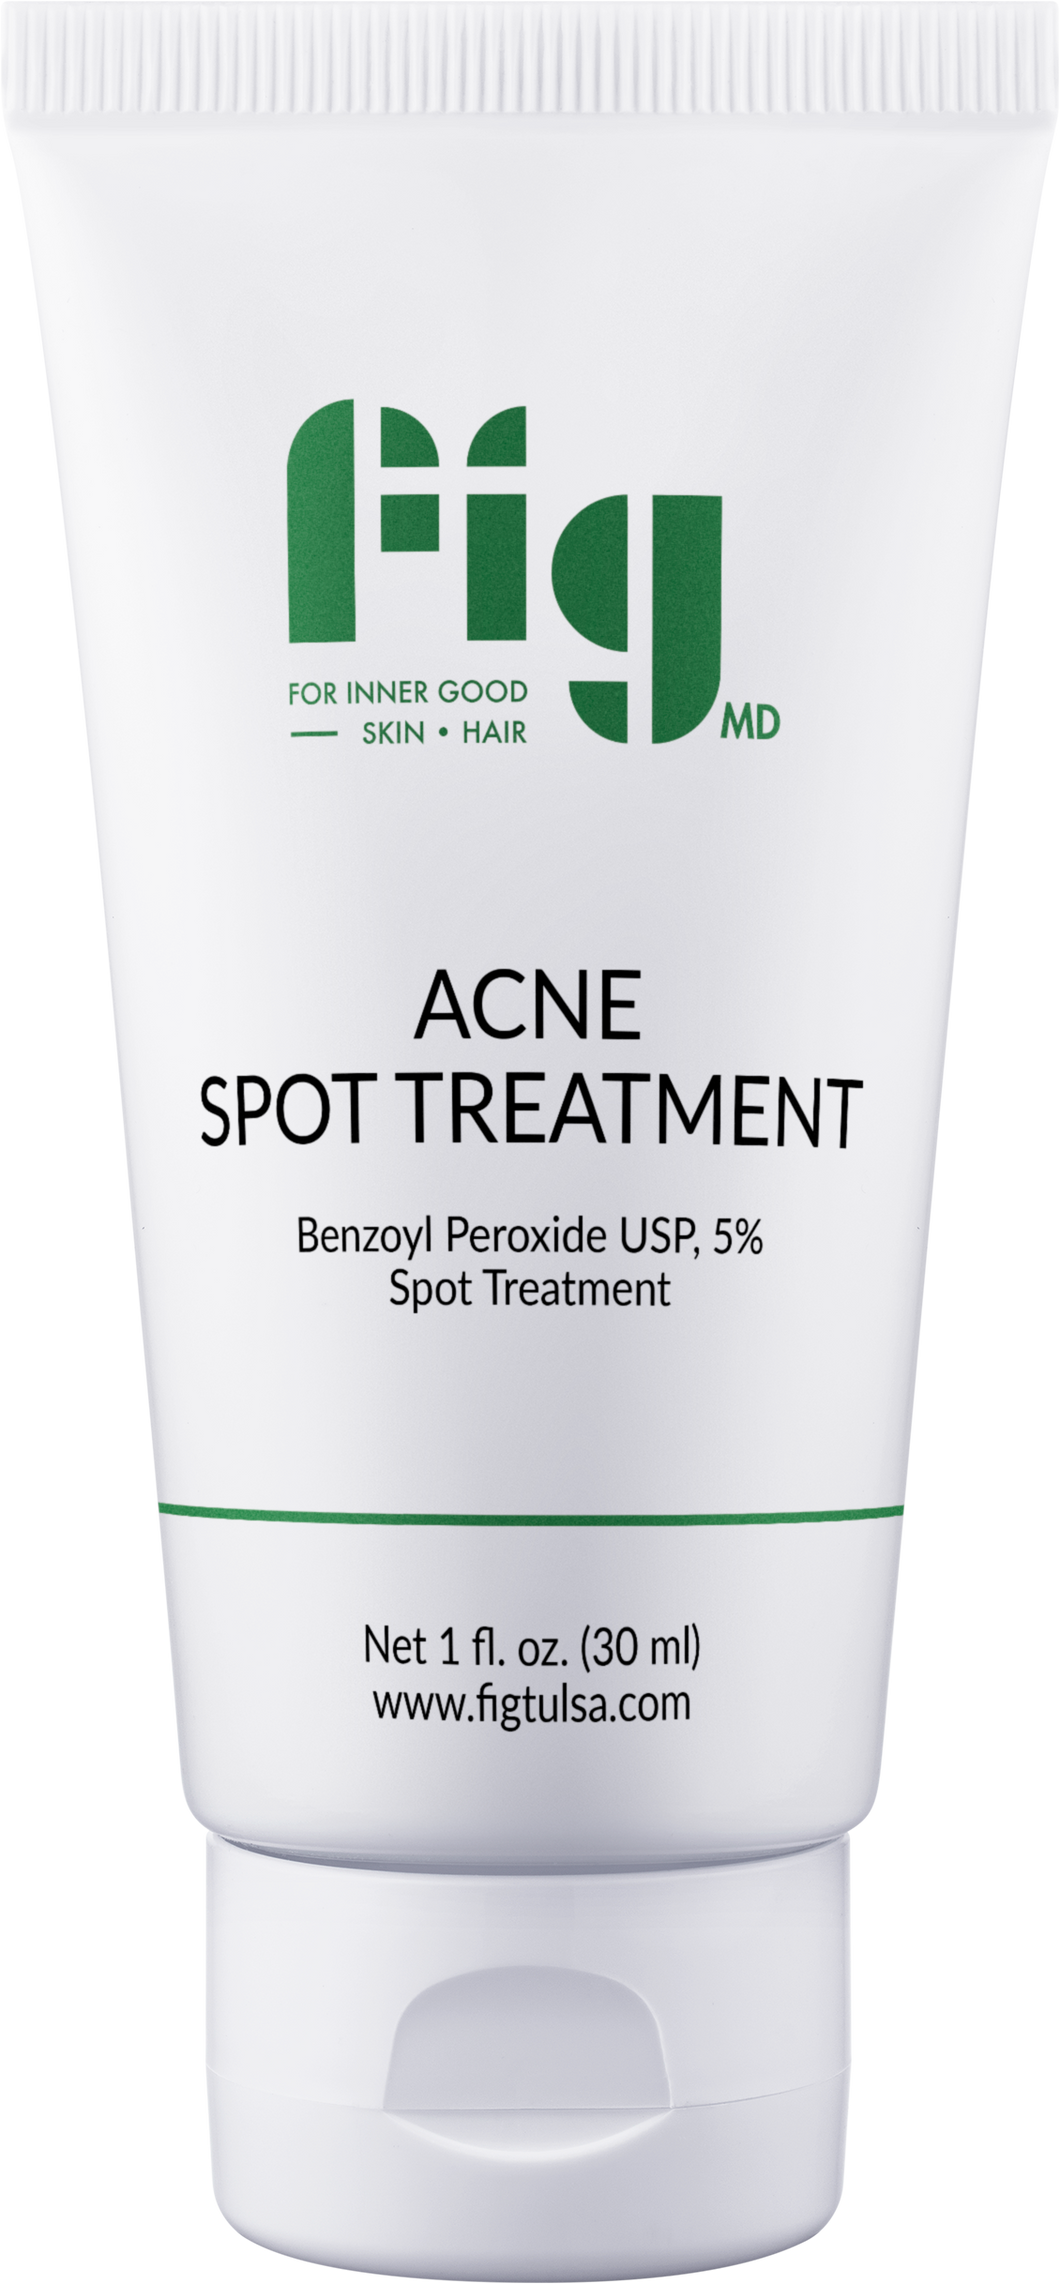 Fig MD Acne Spot Treatment